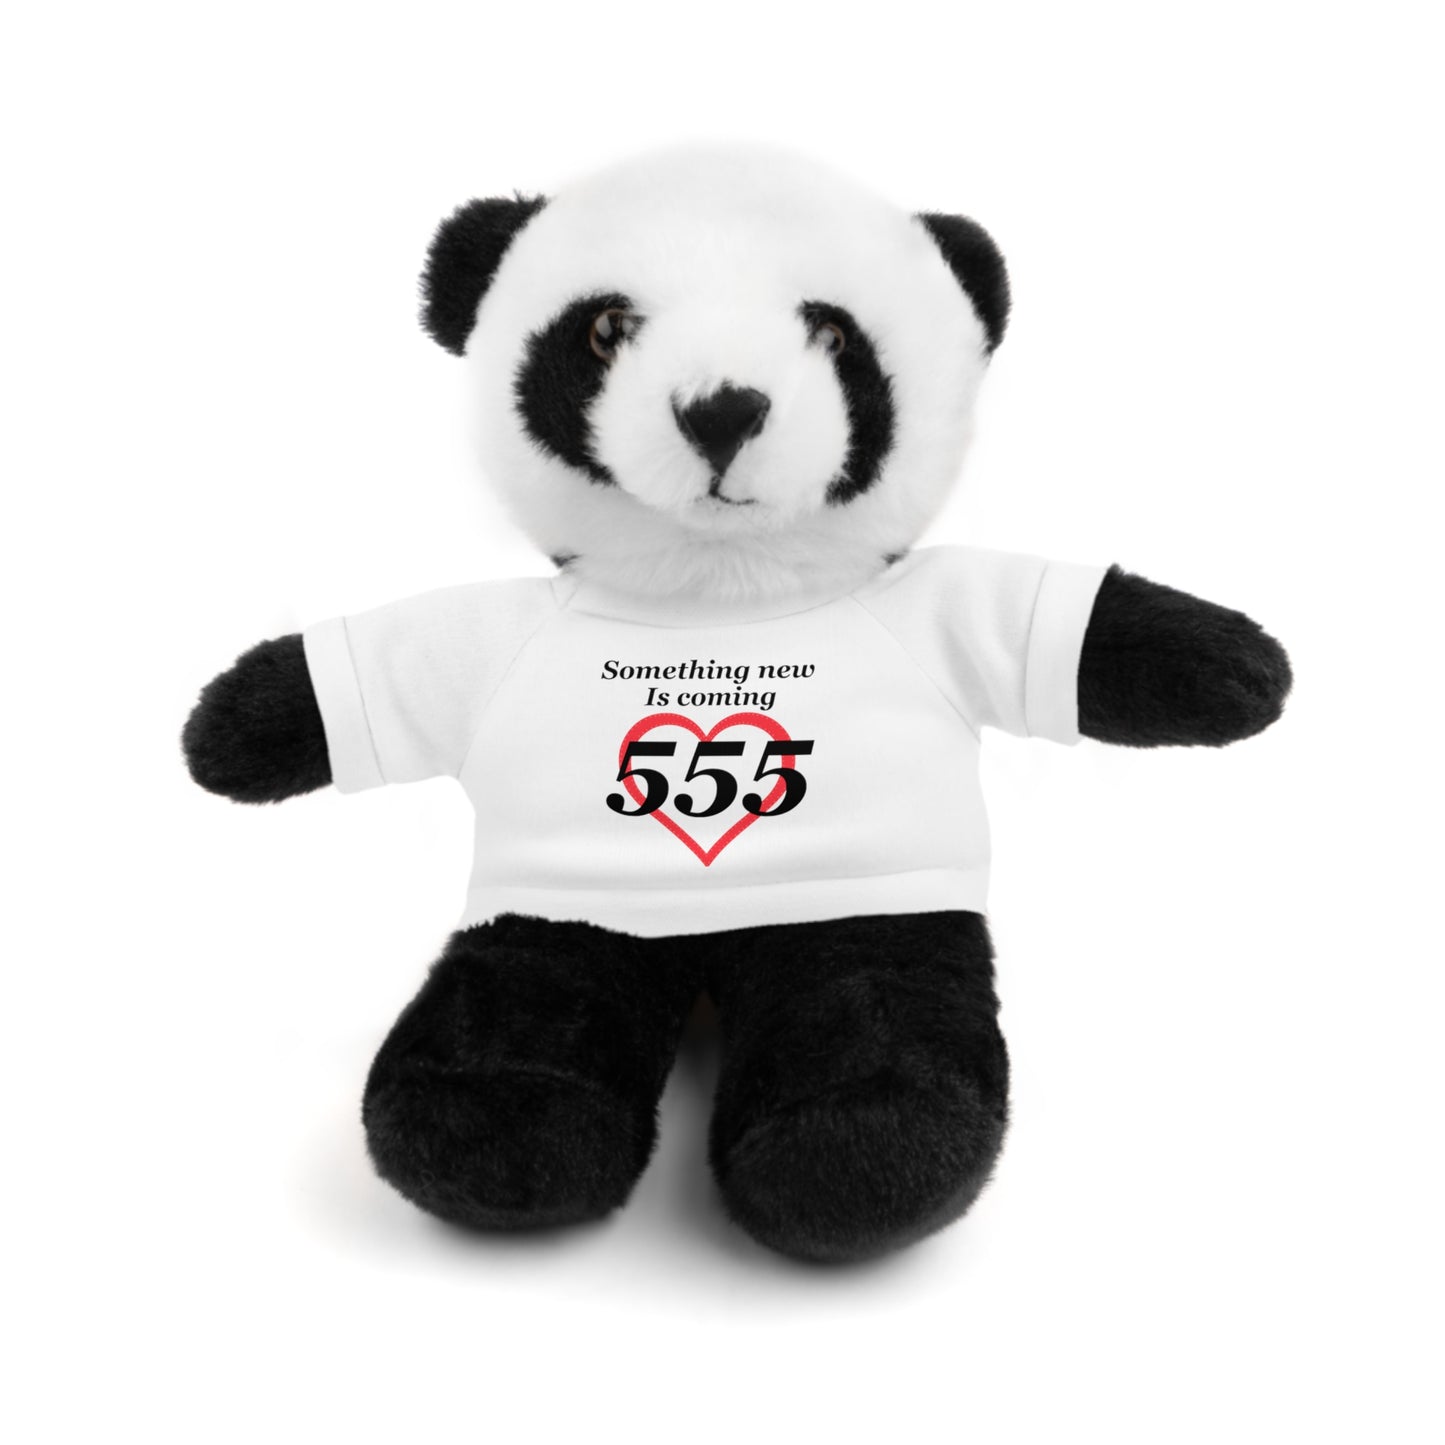 Stuffed Animals with 555 Angel Number Tee